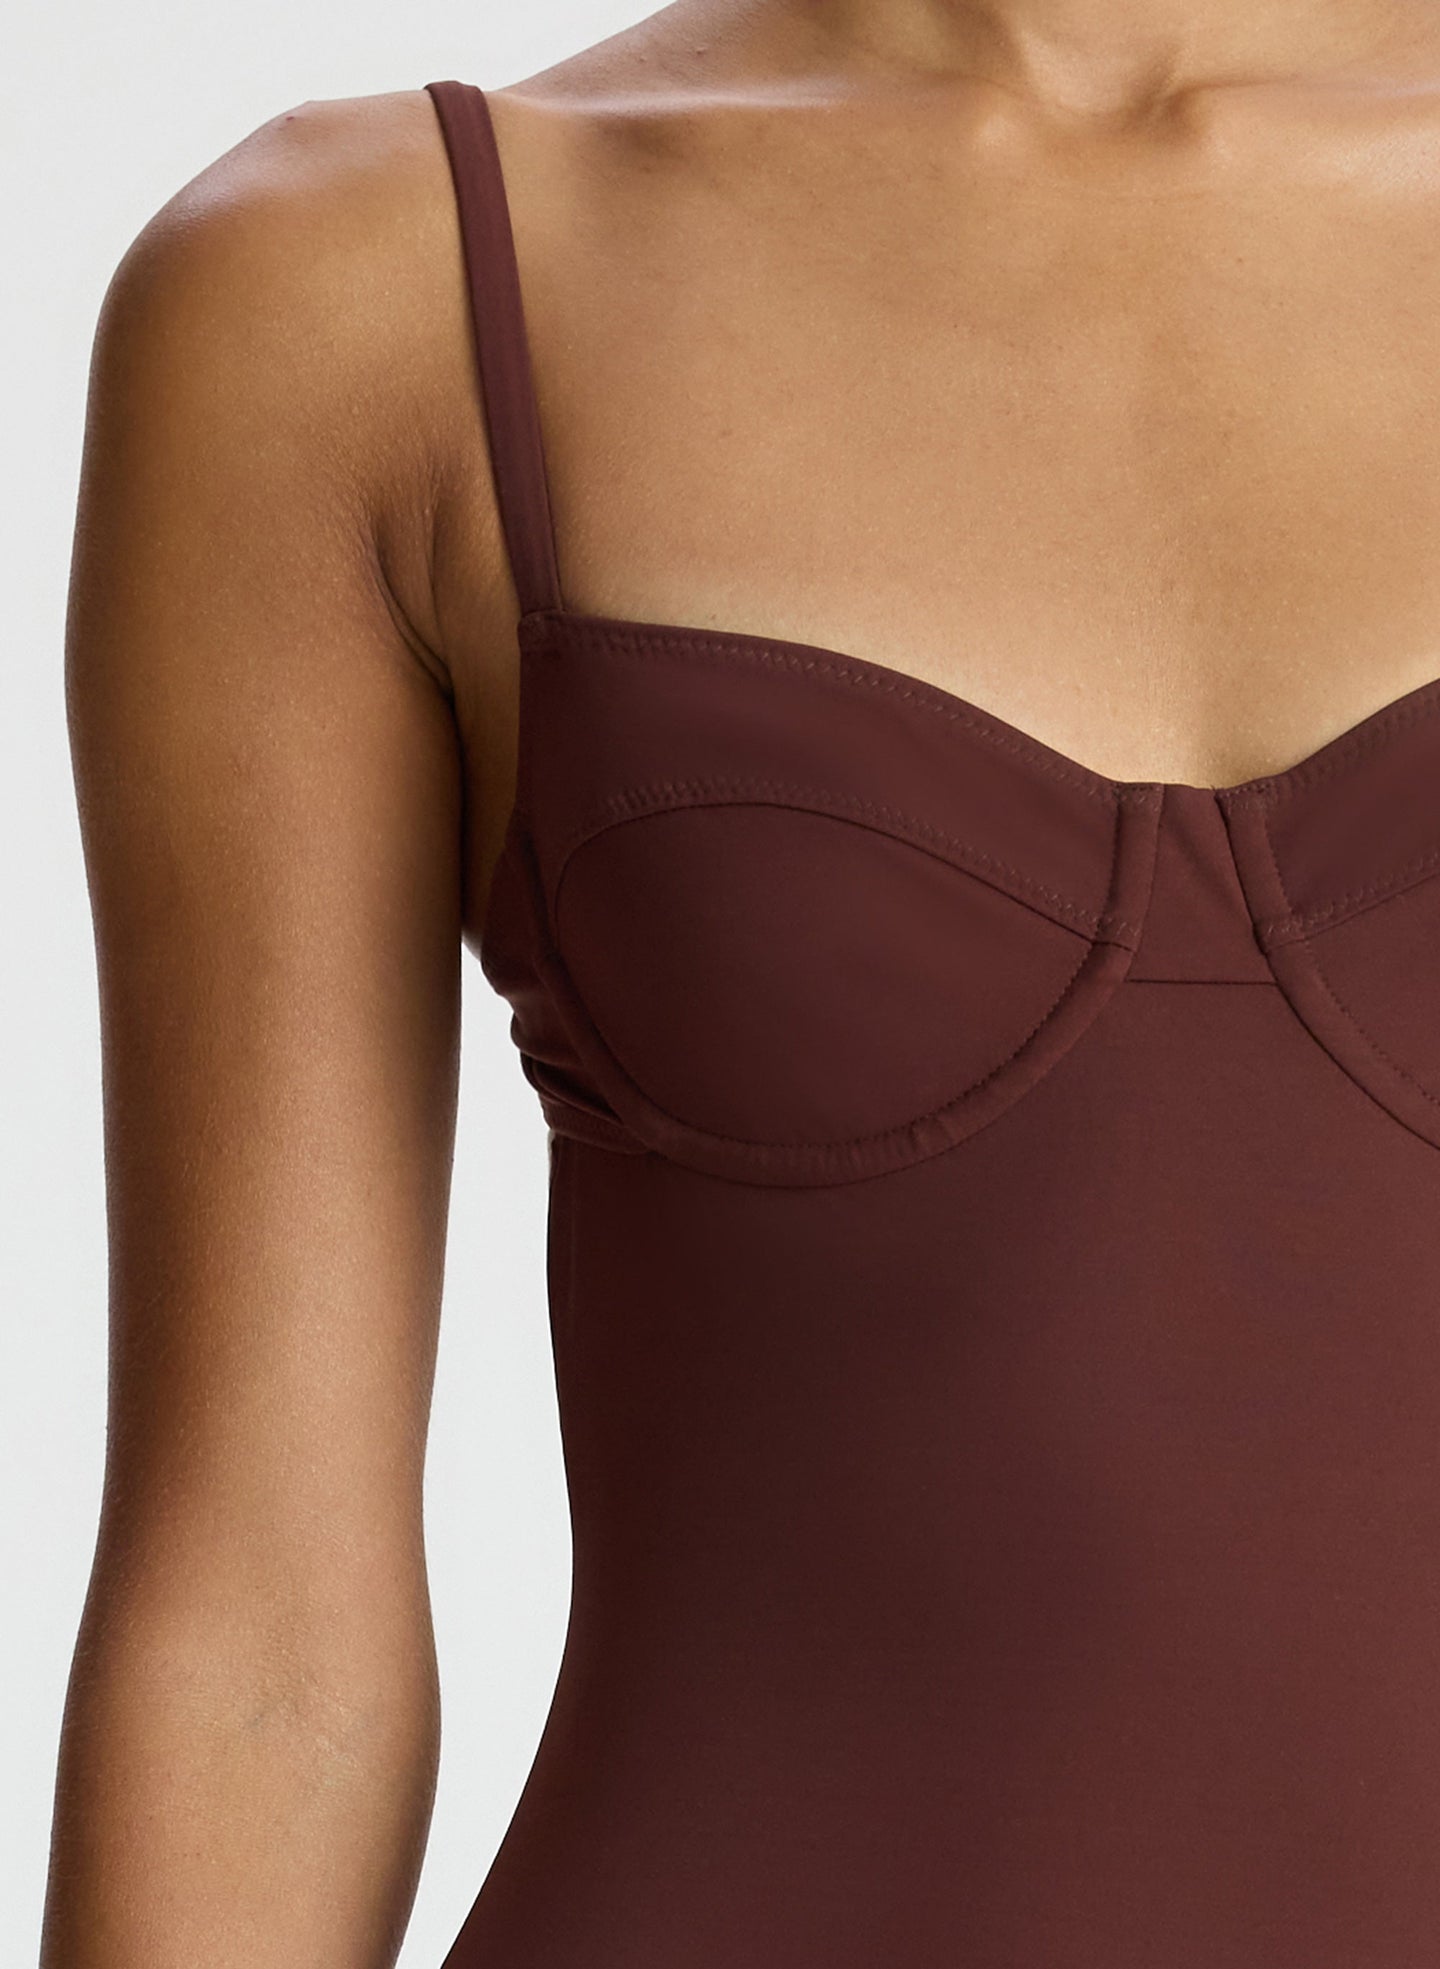 detail view of woman wearing brown one piece swimsuit